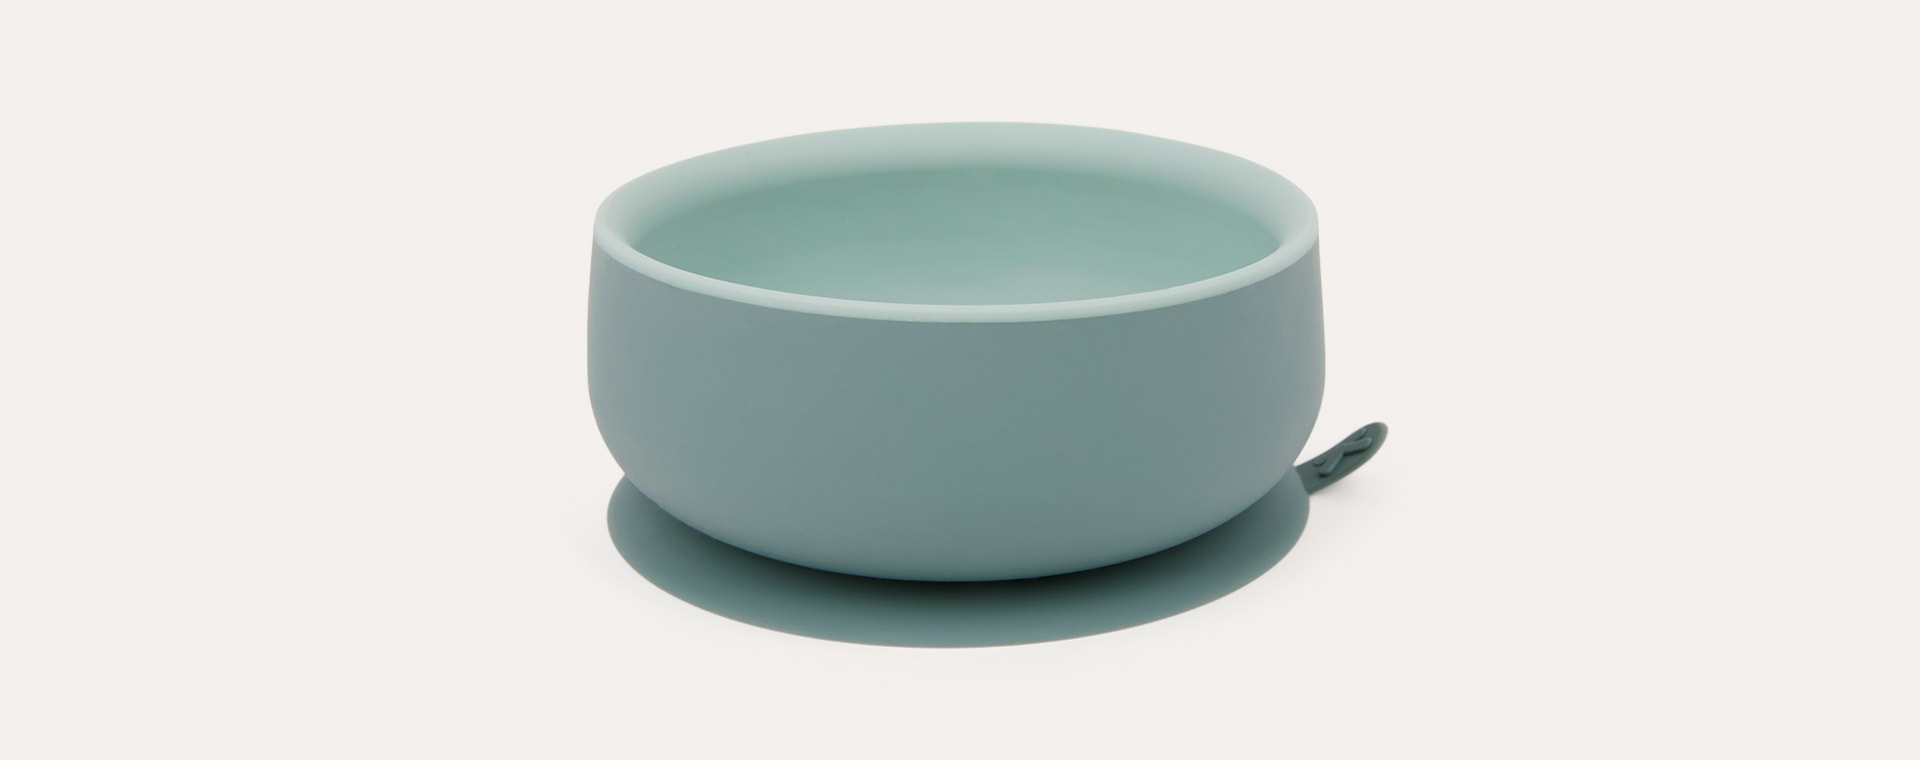 Jade Mix KIDLY Label Suction Bowl & Spoon Set